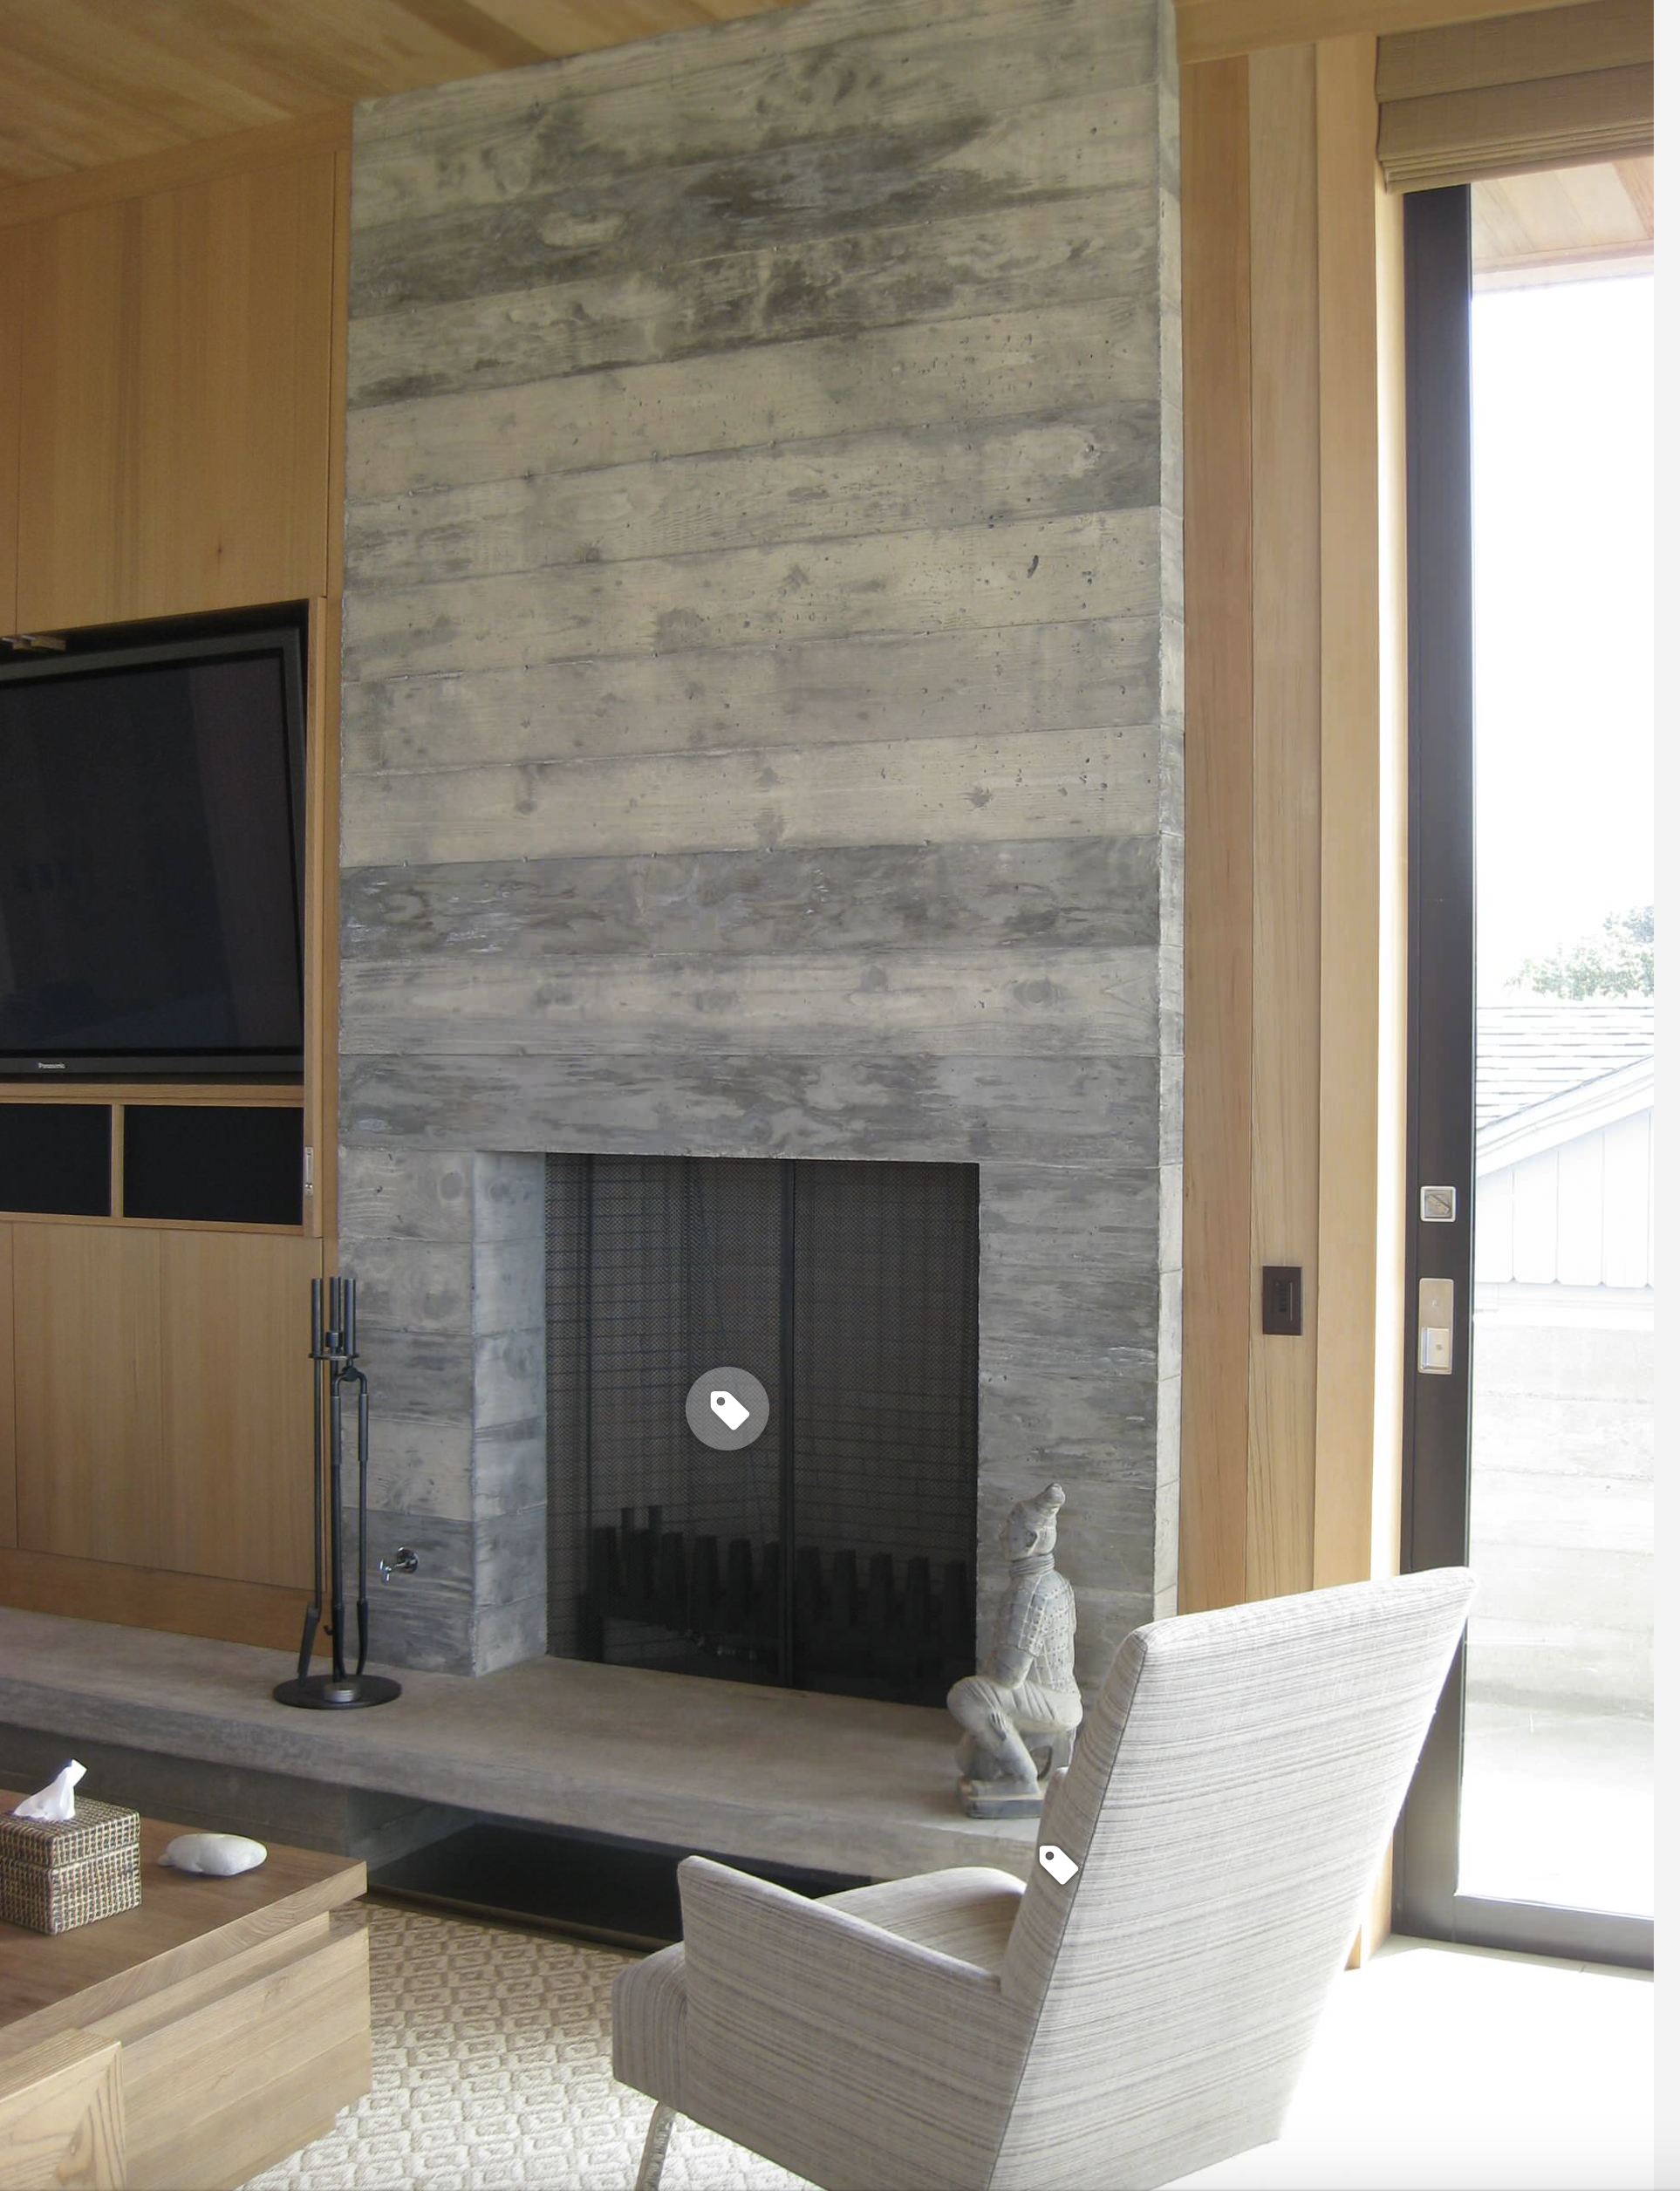 Architectural Fireplaces Best Of Fireplace and Tv ÐÐ°Ð¼Ð¸Ð½